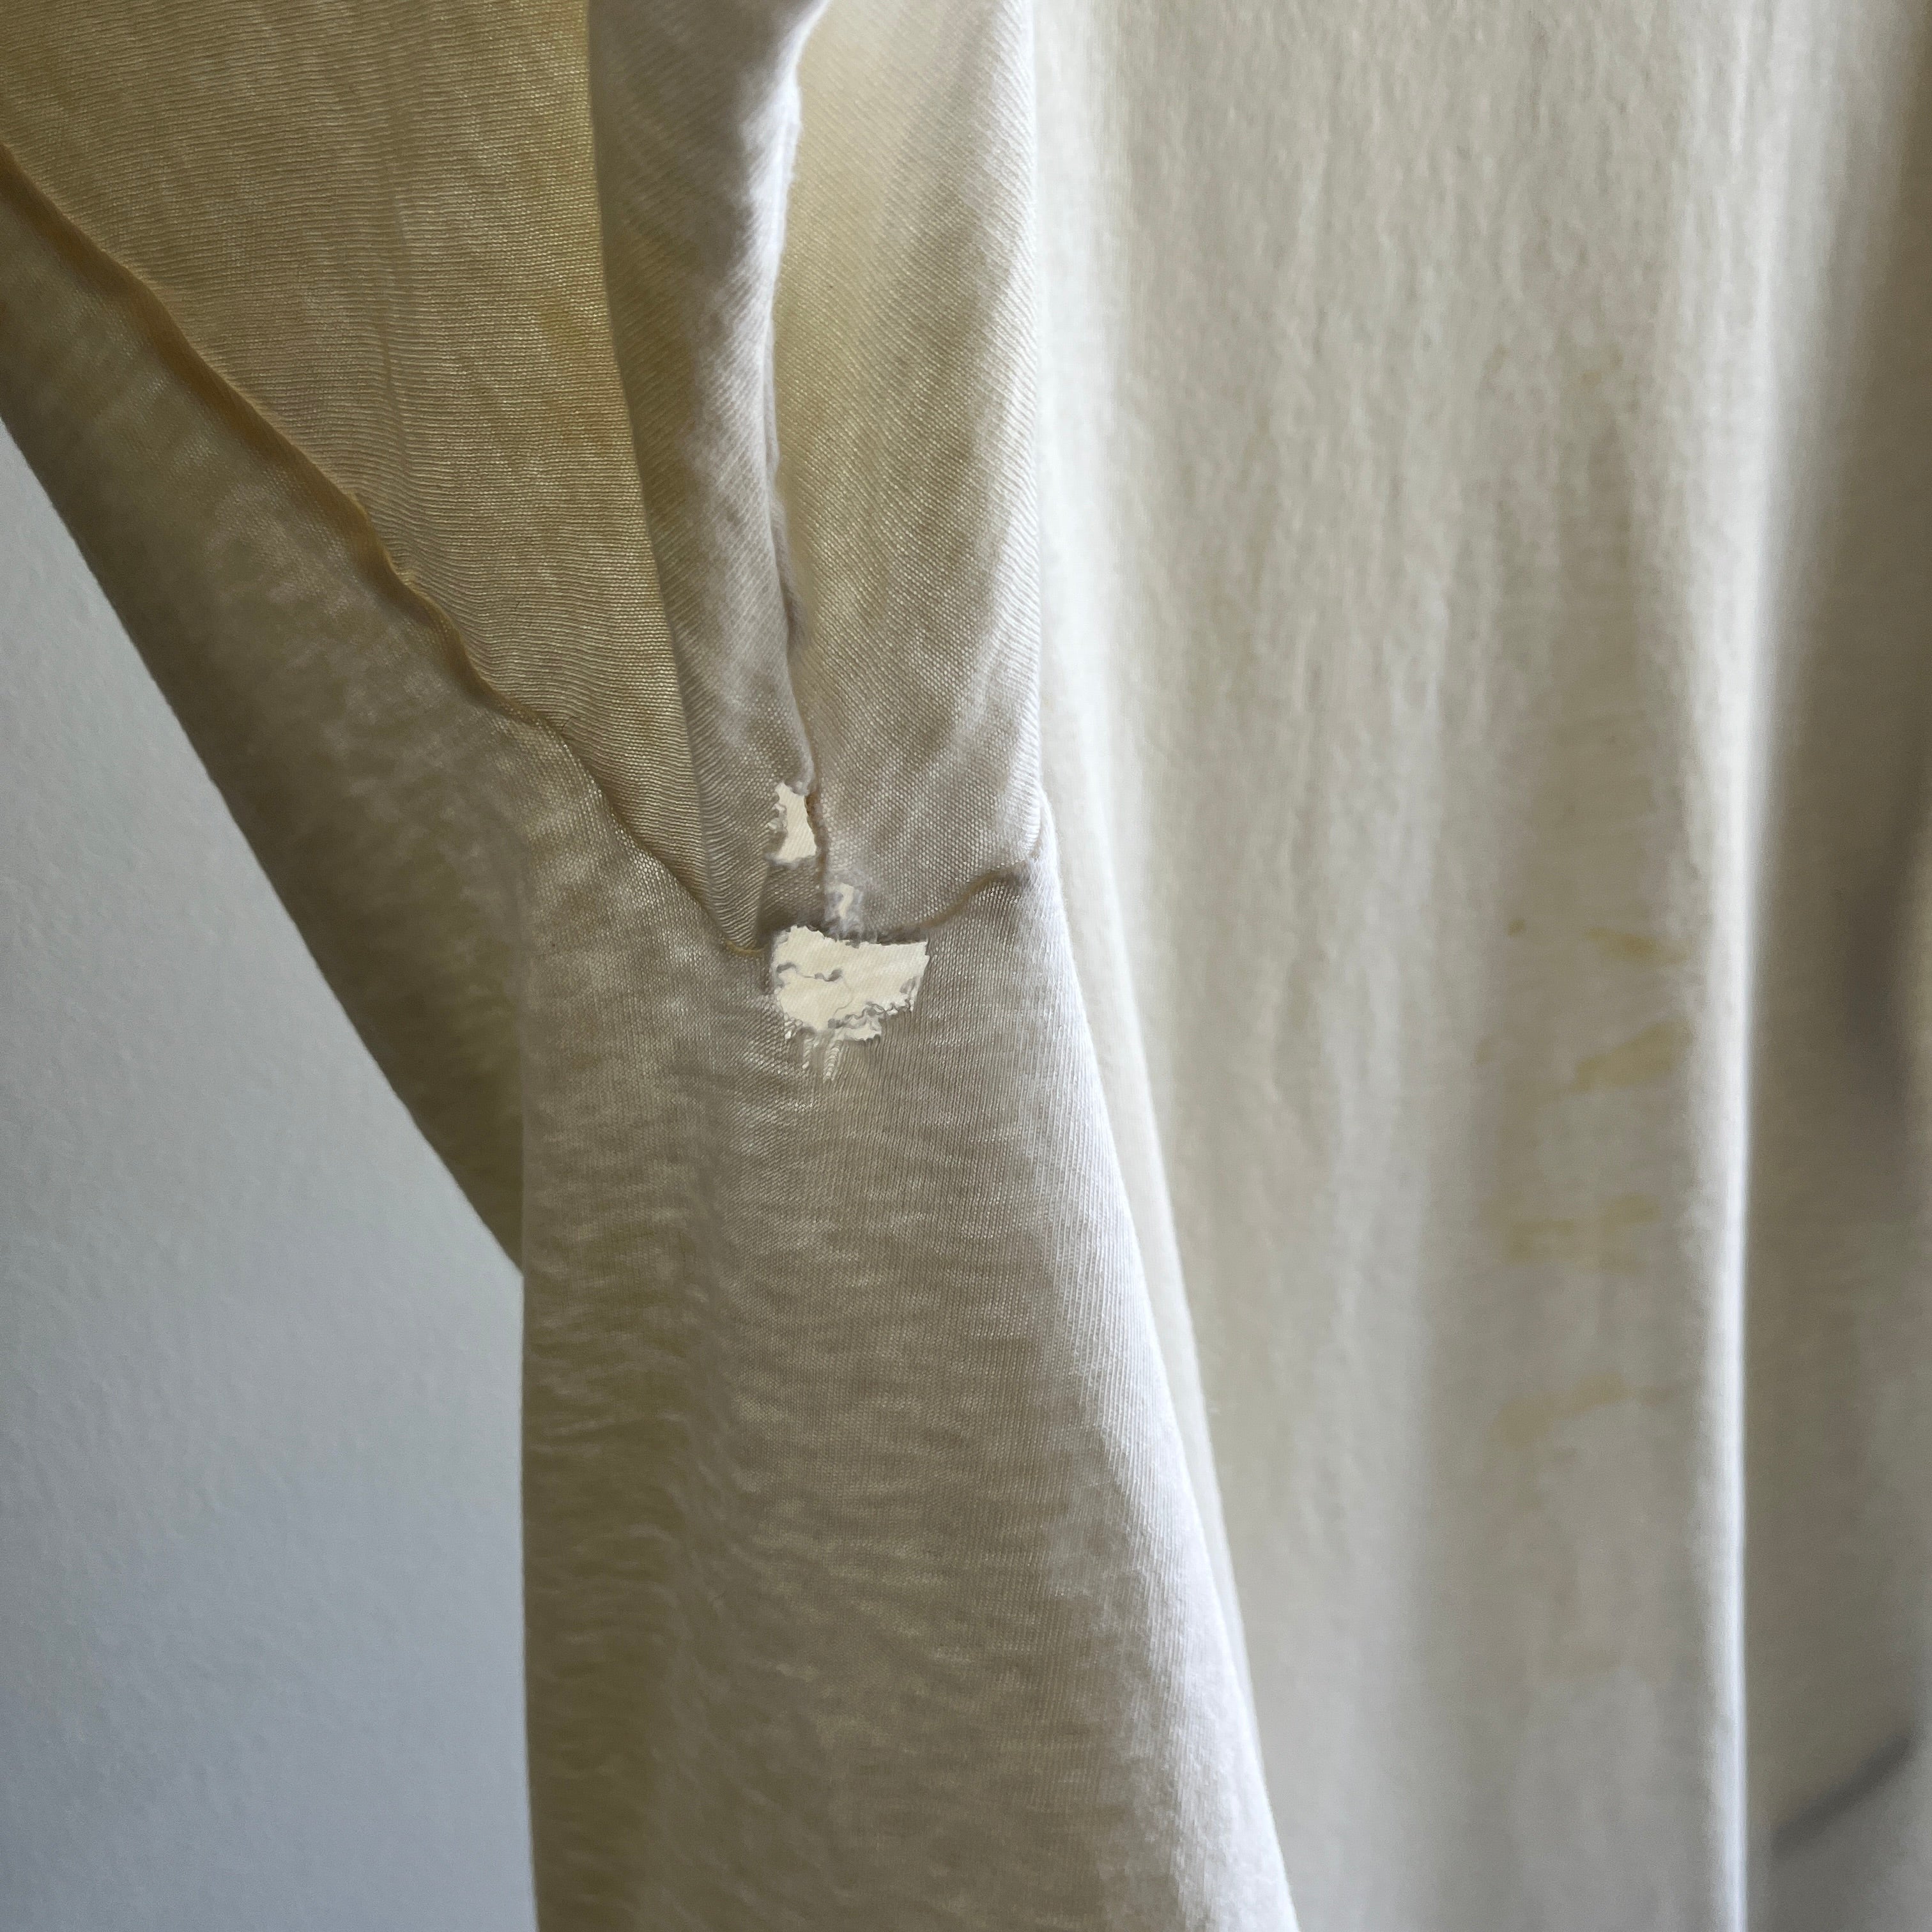 00s Not Vintage But Super Thin and Yellowed From Age - Blank White Thrashed T-Shirt